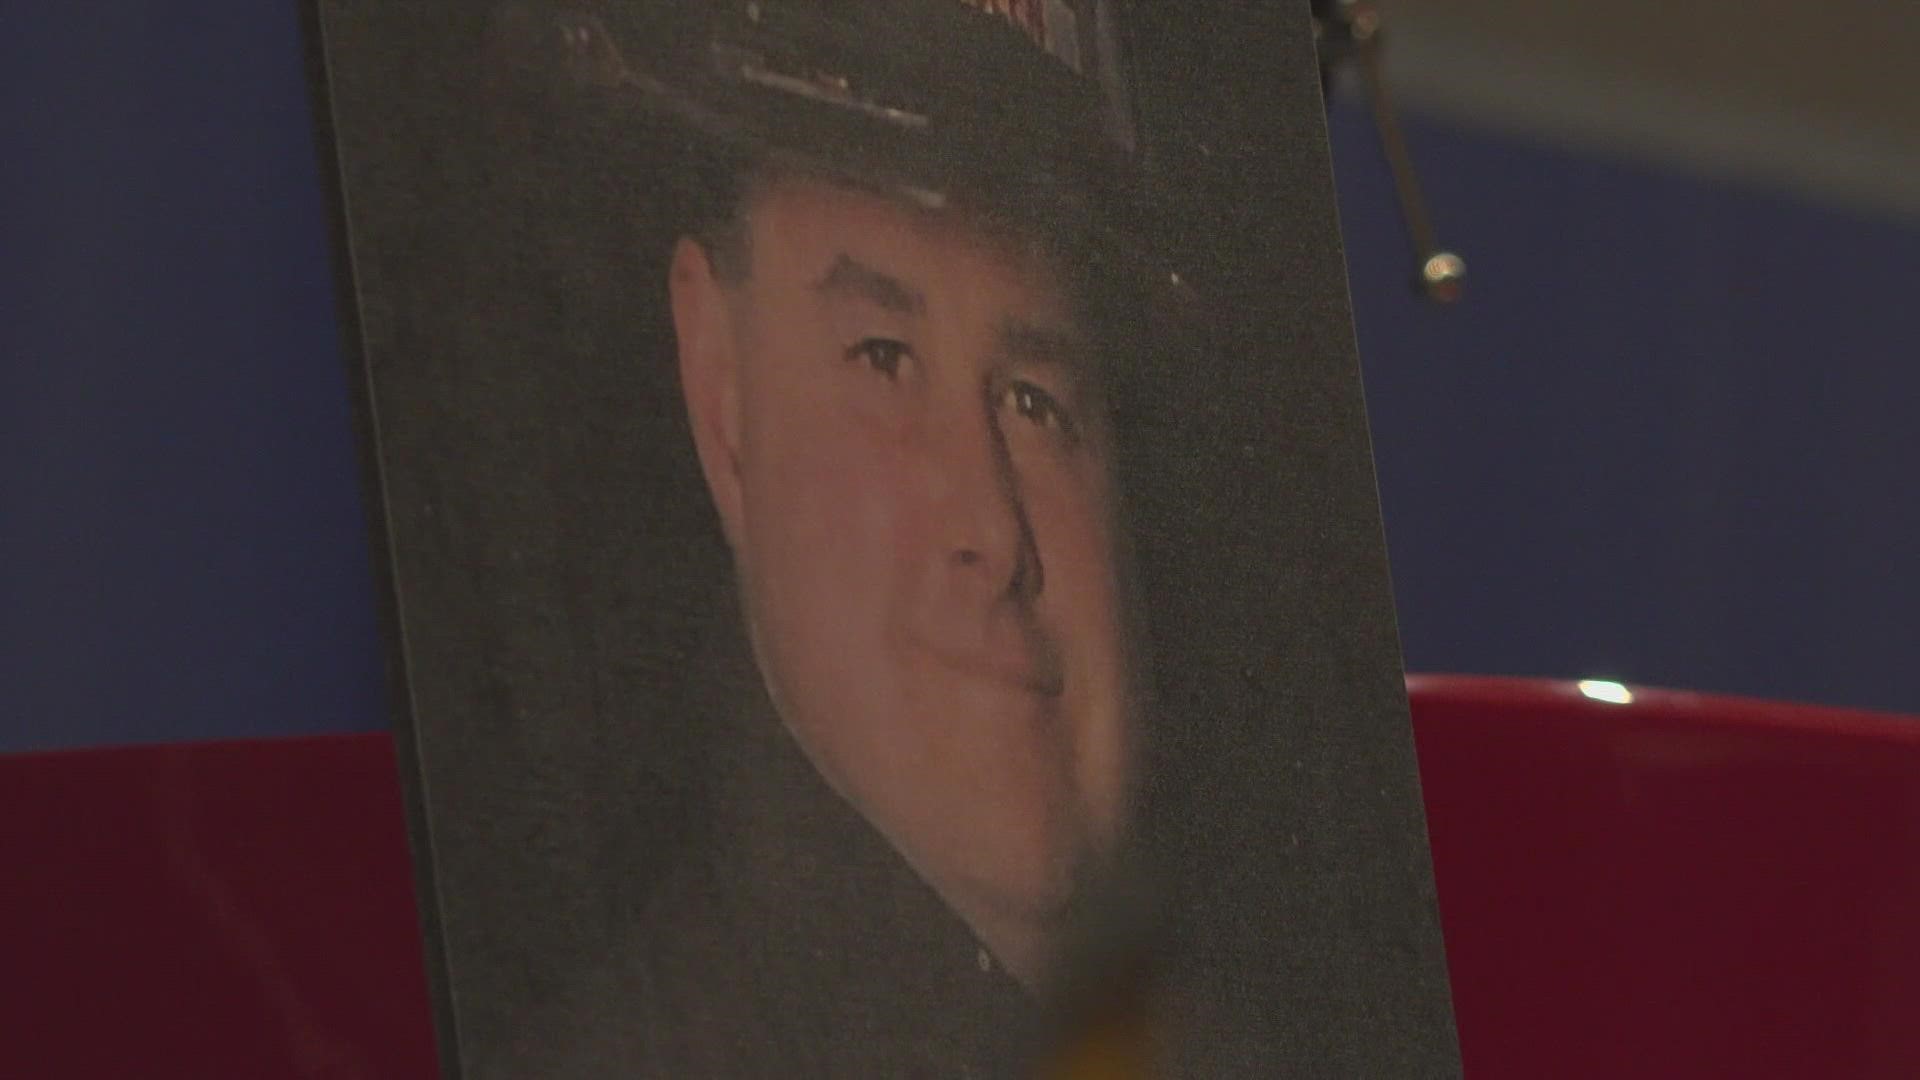 Family, friends and firefighters held a memorial Saturday for Chad Mittleider, who passed away following a 24-hour shift in December.